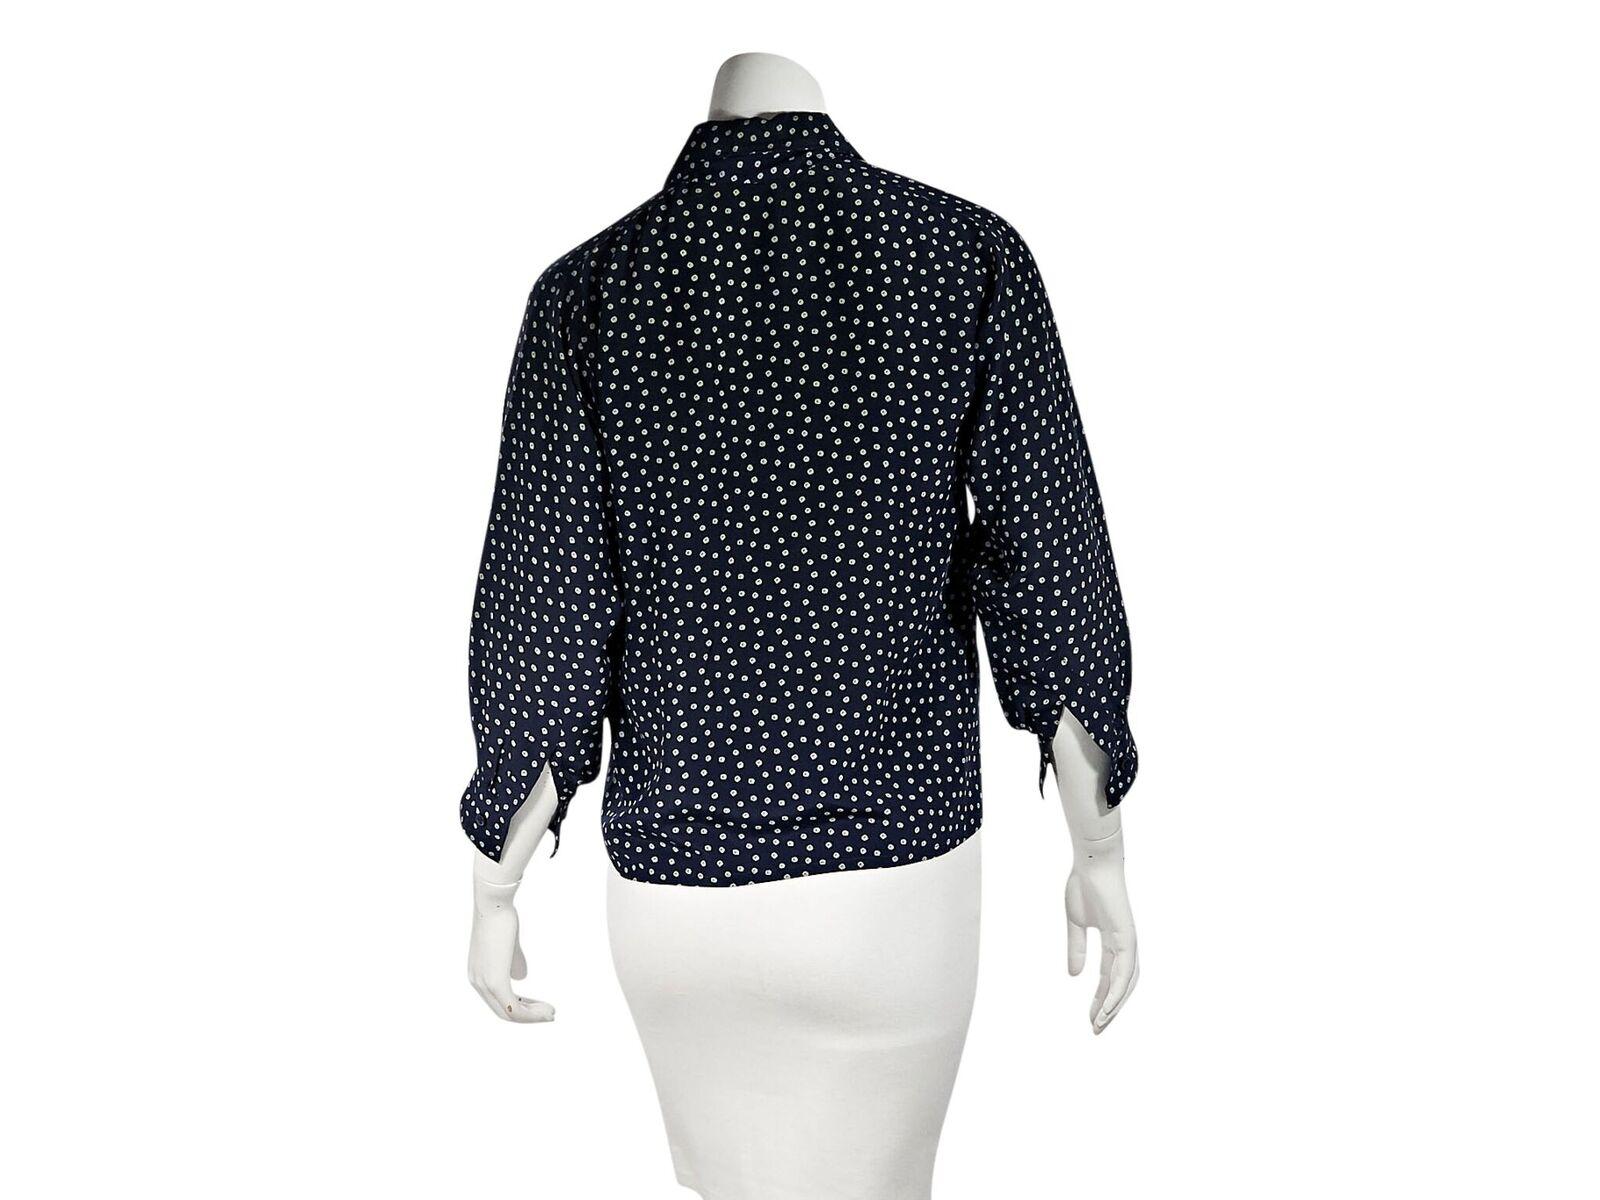 Product details:  Navy blue printed blouse by Yves Saint Laurent.  Spread collar with pussy bow.  Three-quarter length sleeves.  Single button cuffs.  Button-front closure.  38